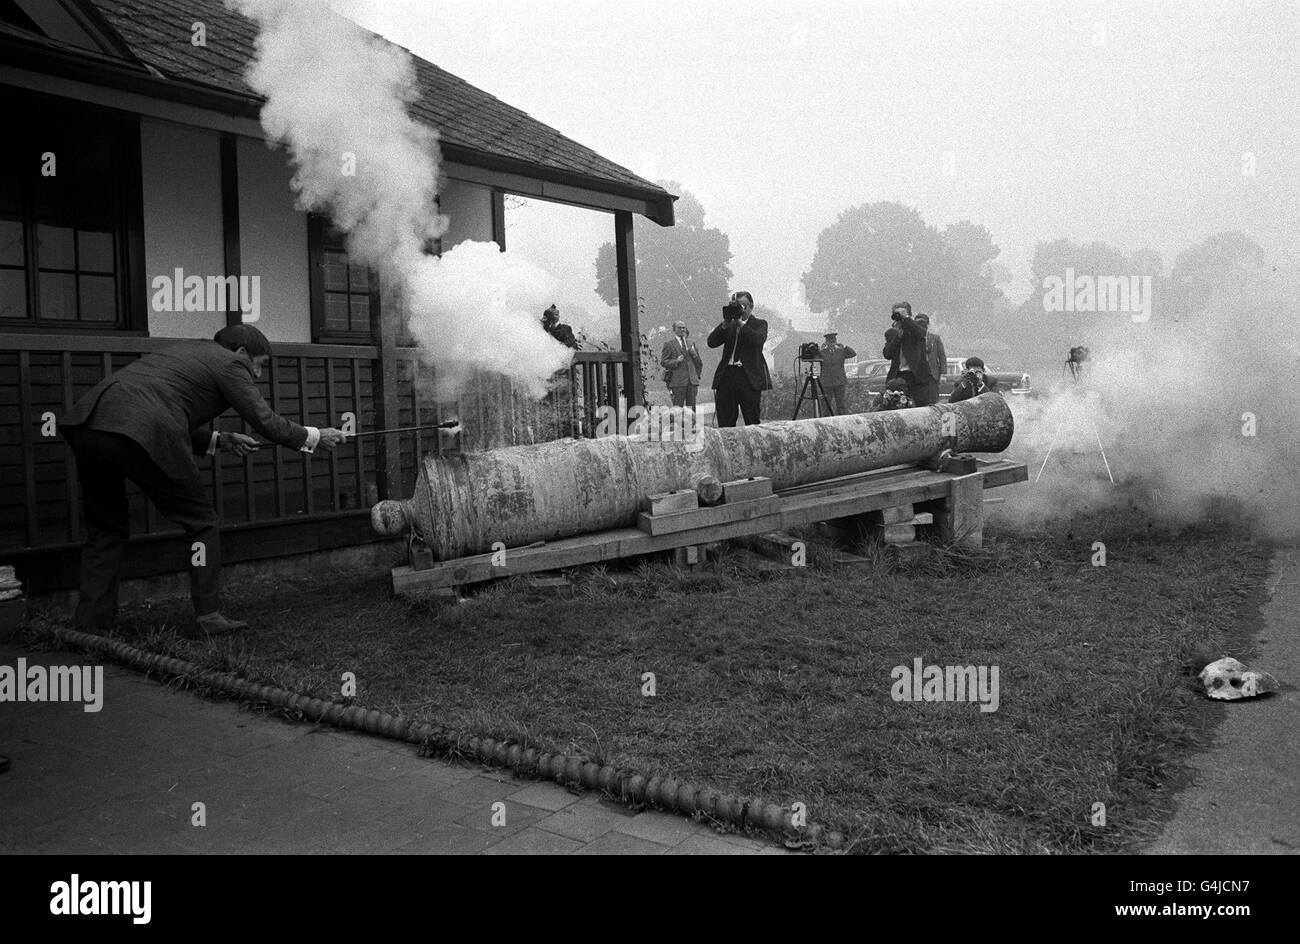 21/10/69: A LIBRARY FILE PICTURE OF THE 'VIGO' CANNON A LATE 17TH CENTURY FRENCH NAVAL PIECE BEING FIRED BY ROLAND MORRIS OF PENZANCE, CORNWALL AT THE SHOOTING SCHOOL OF MAYFAIR GUNMAKERS HOLLAND AND HOLLAND AT NORTHWOOD, MIDDLESEX Stock Photo